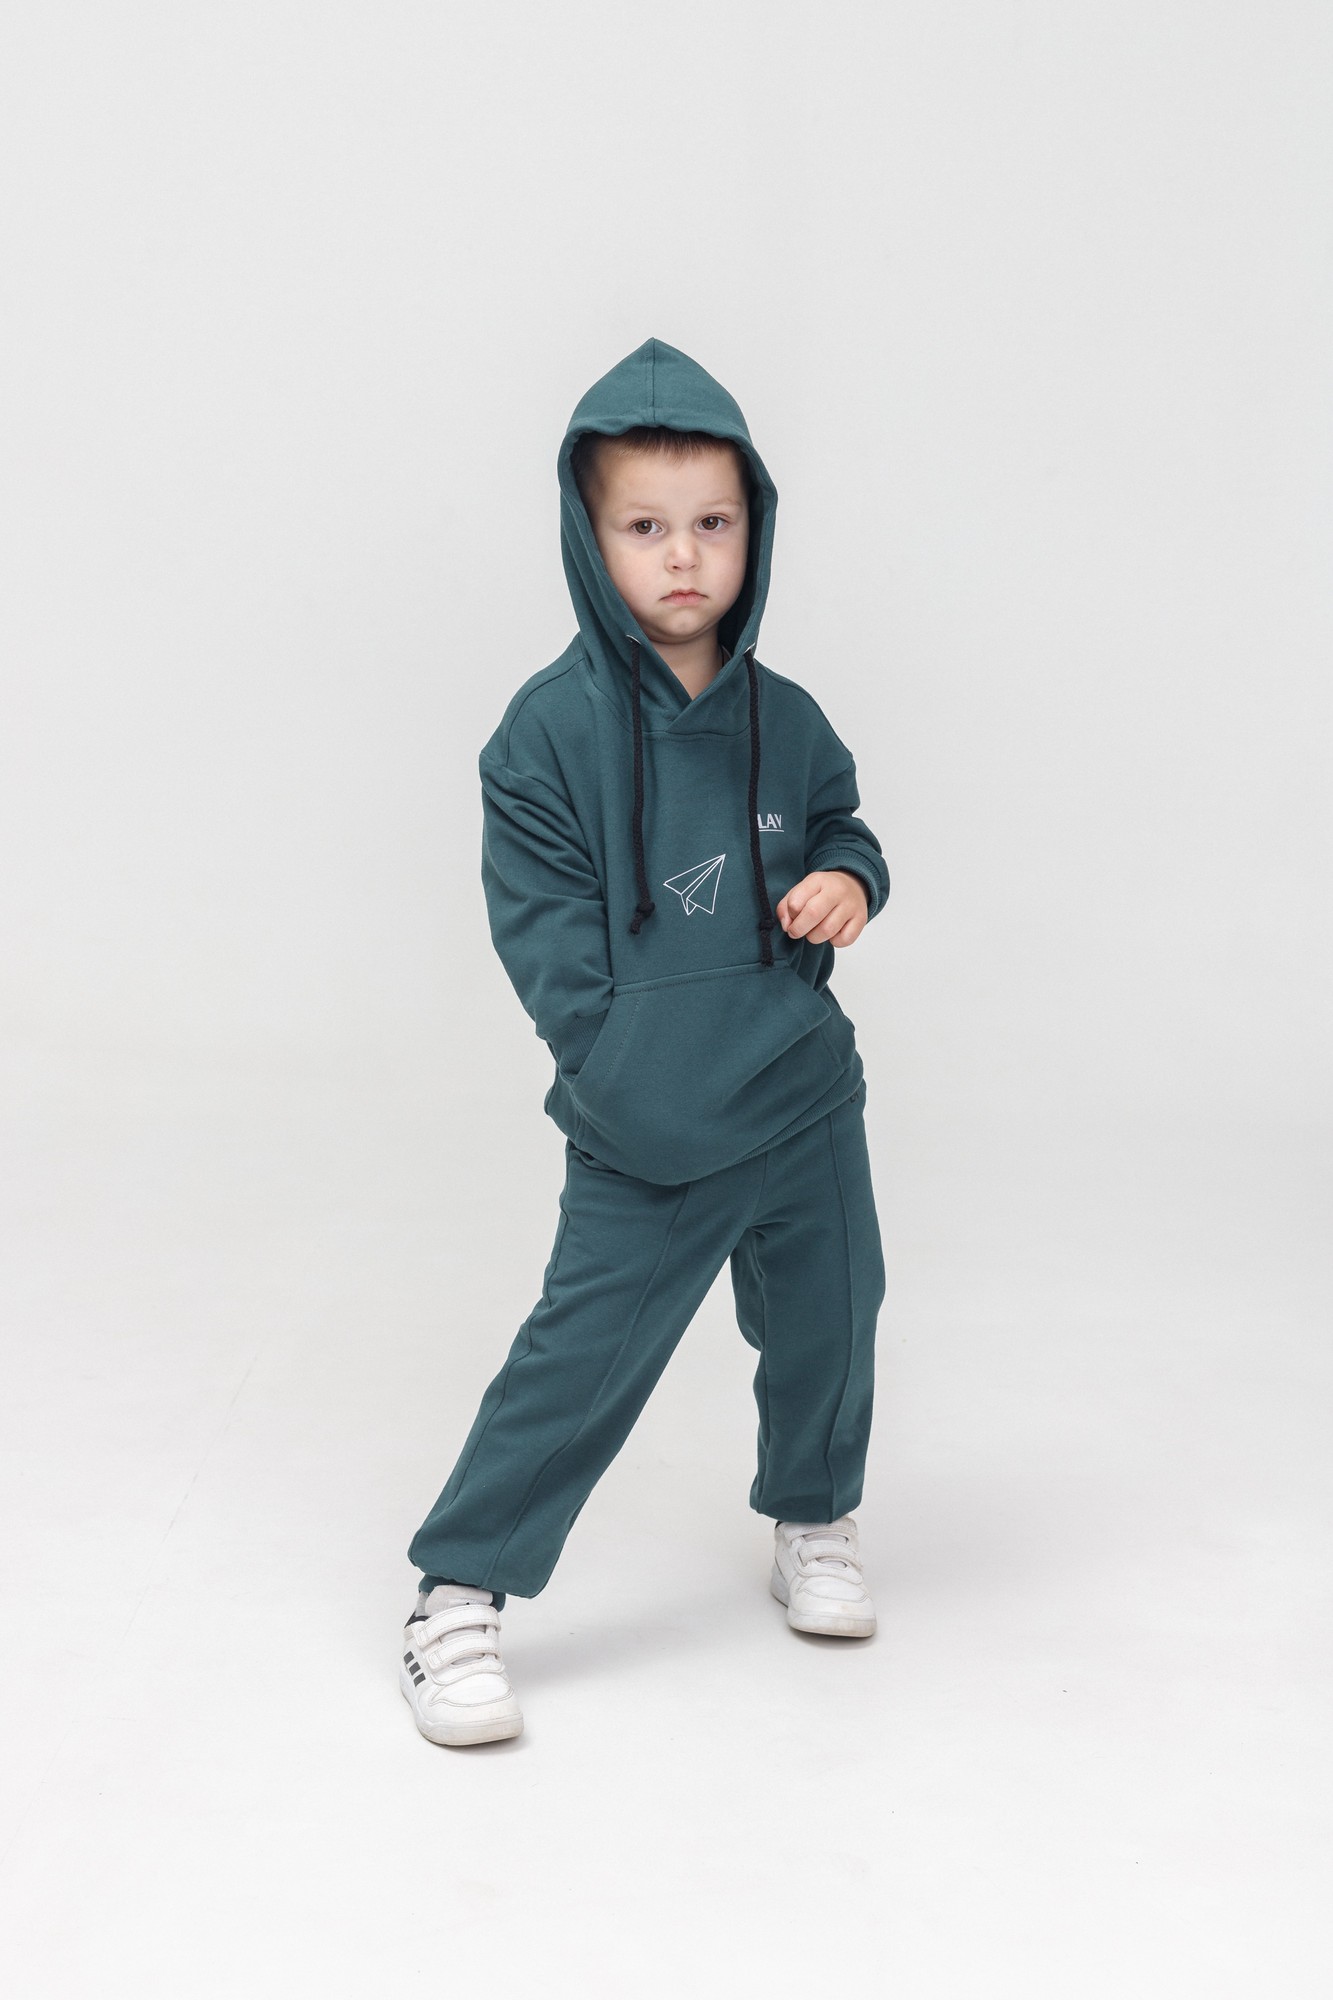 Hoodies and trousers for every day for little tomboys